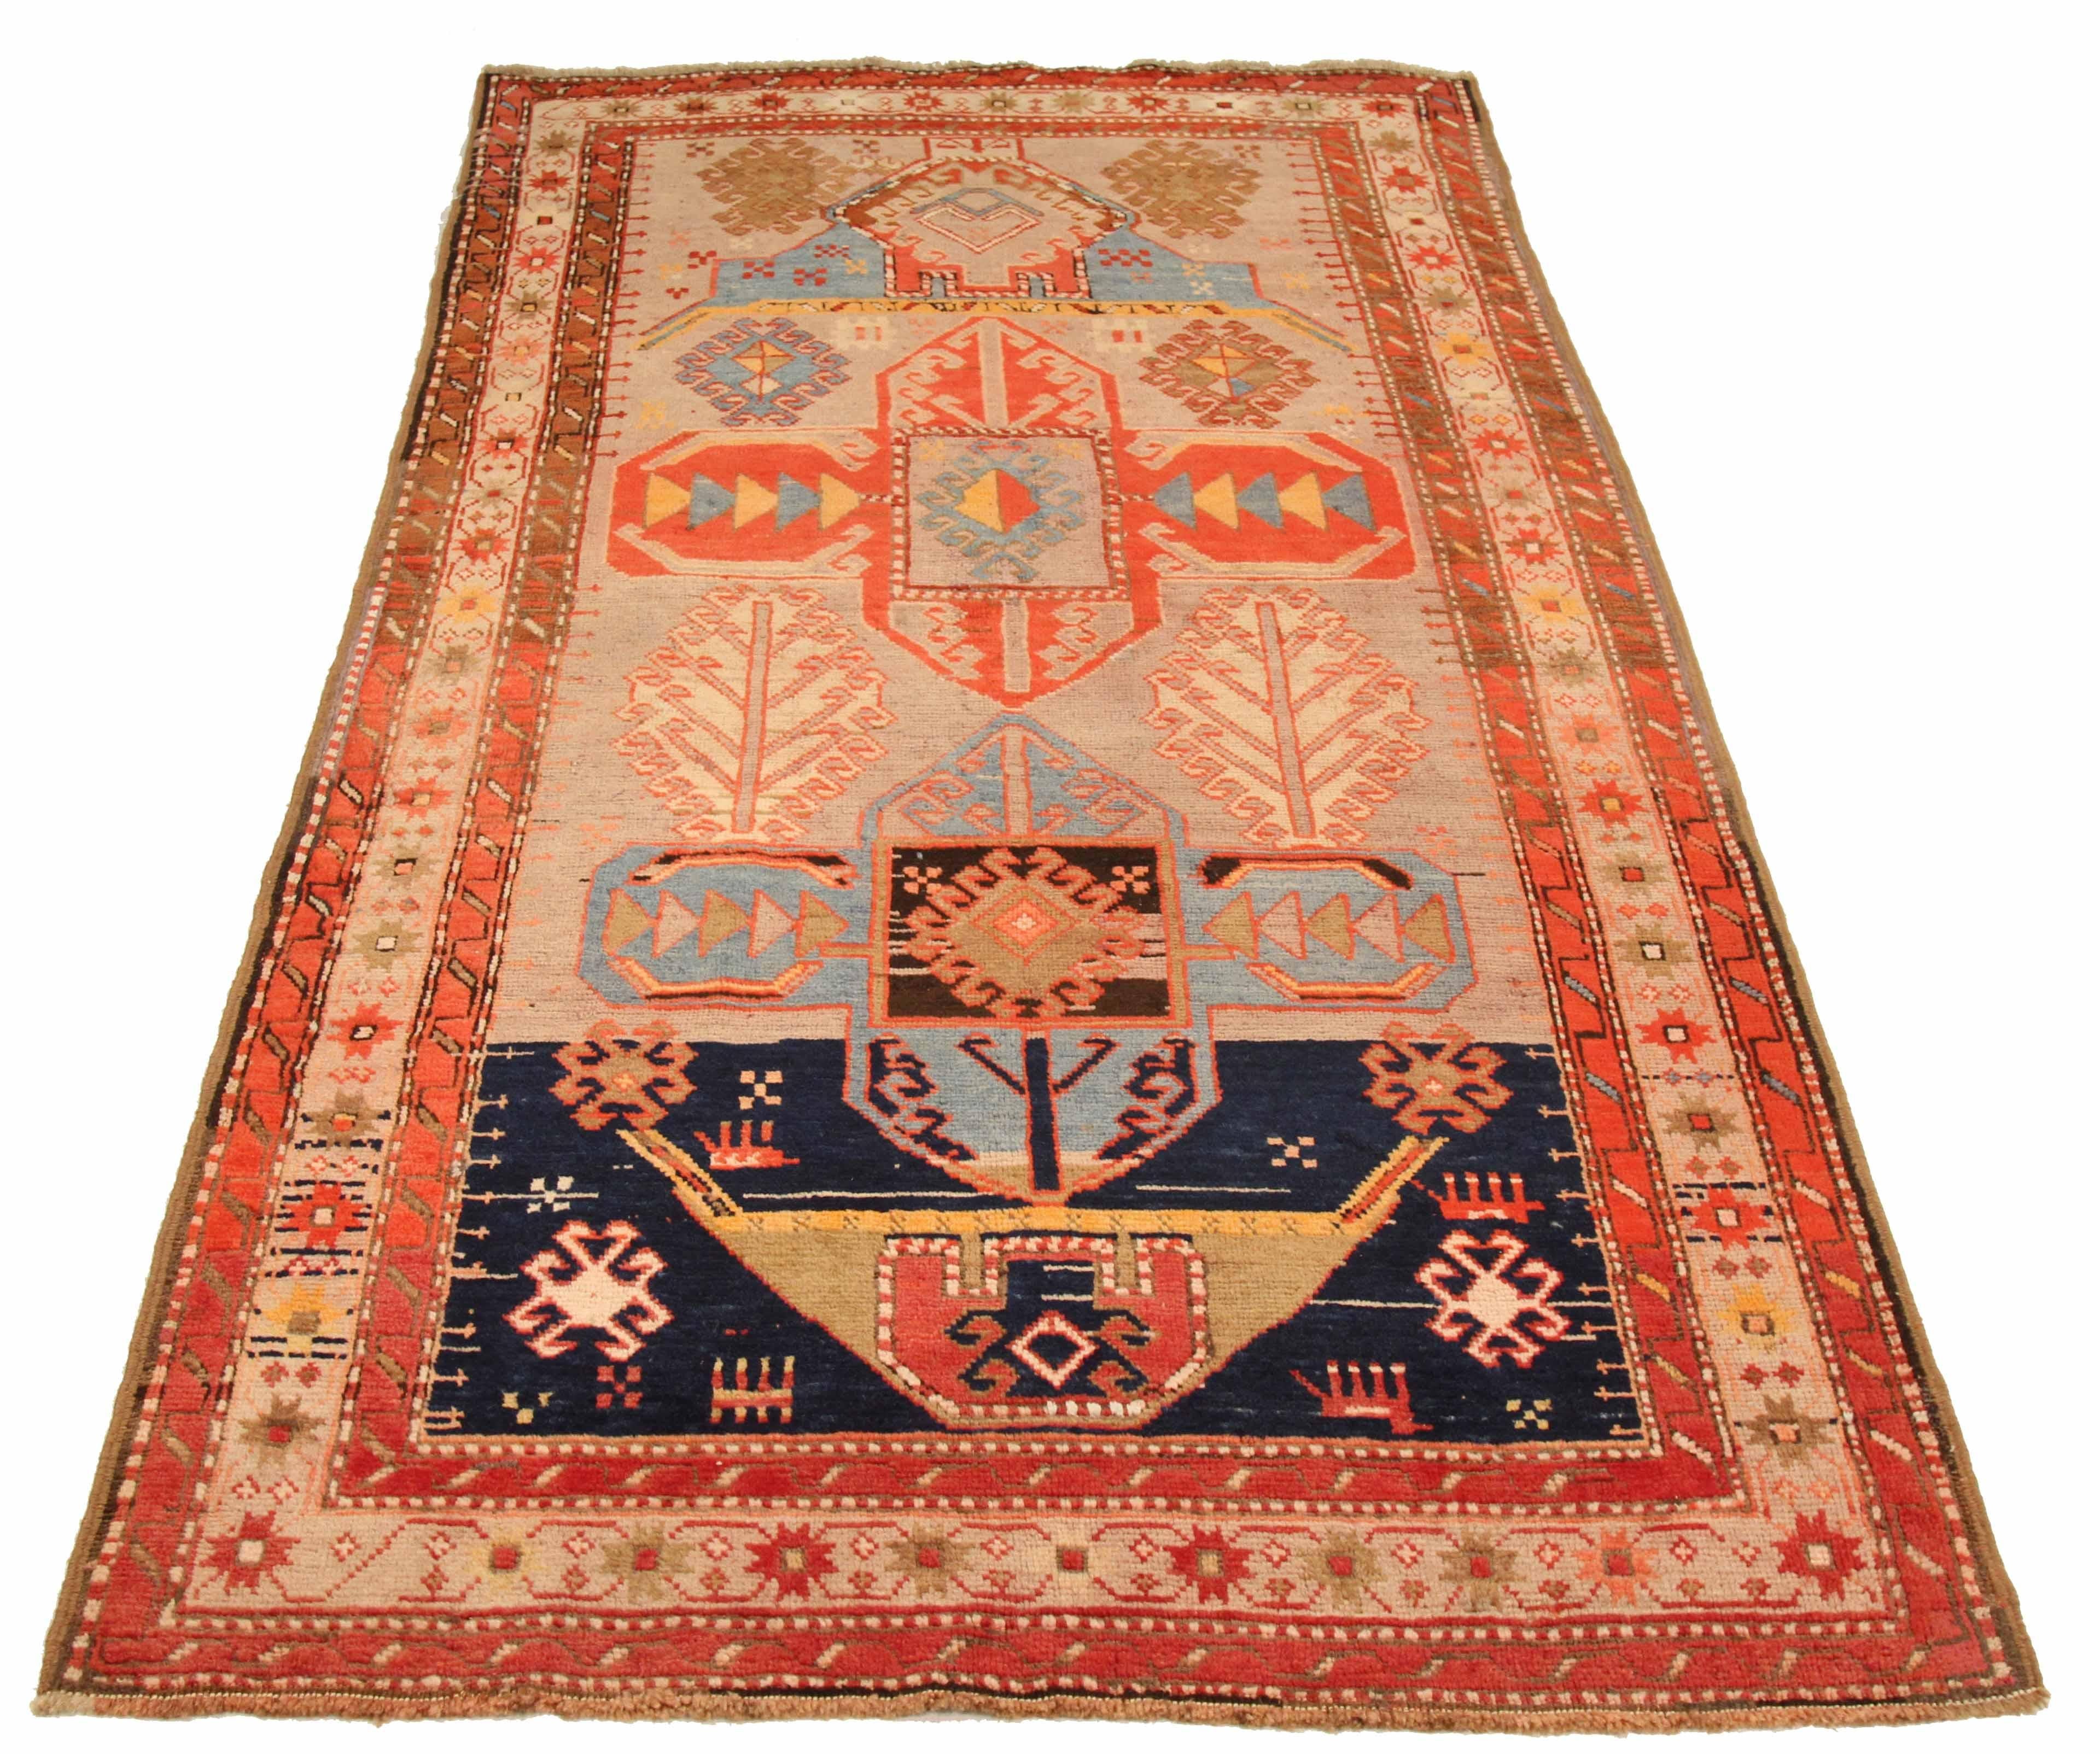 Antique Russia area rug handwoven from the finest sheep’s wool. It’s colored with all-natural vegetable dyes that are safe for humans and pets. It’s a traditional Karabagh design handwoven by expert artisans. It’s a lovely area rug that can be